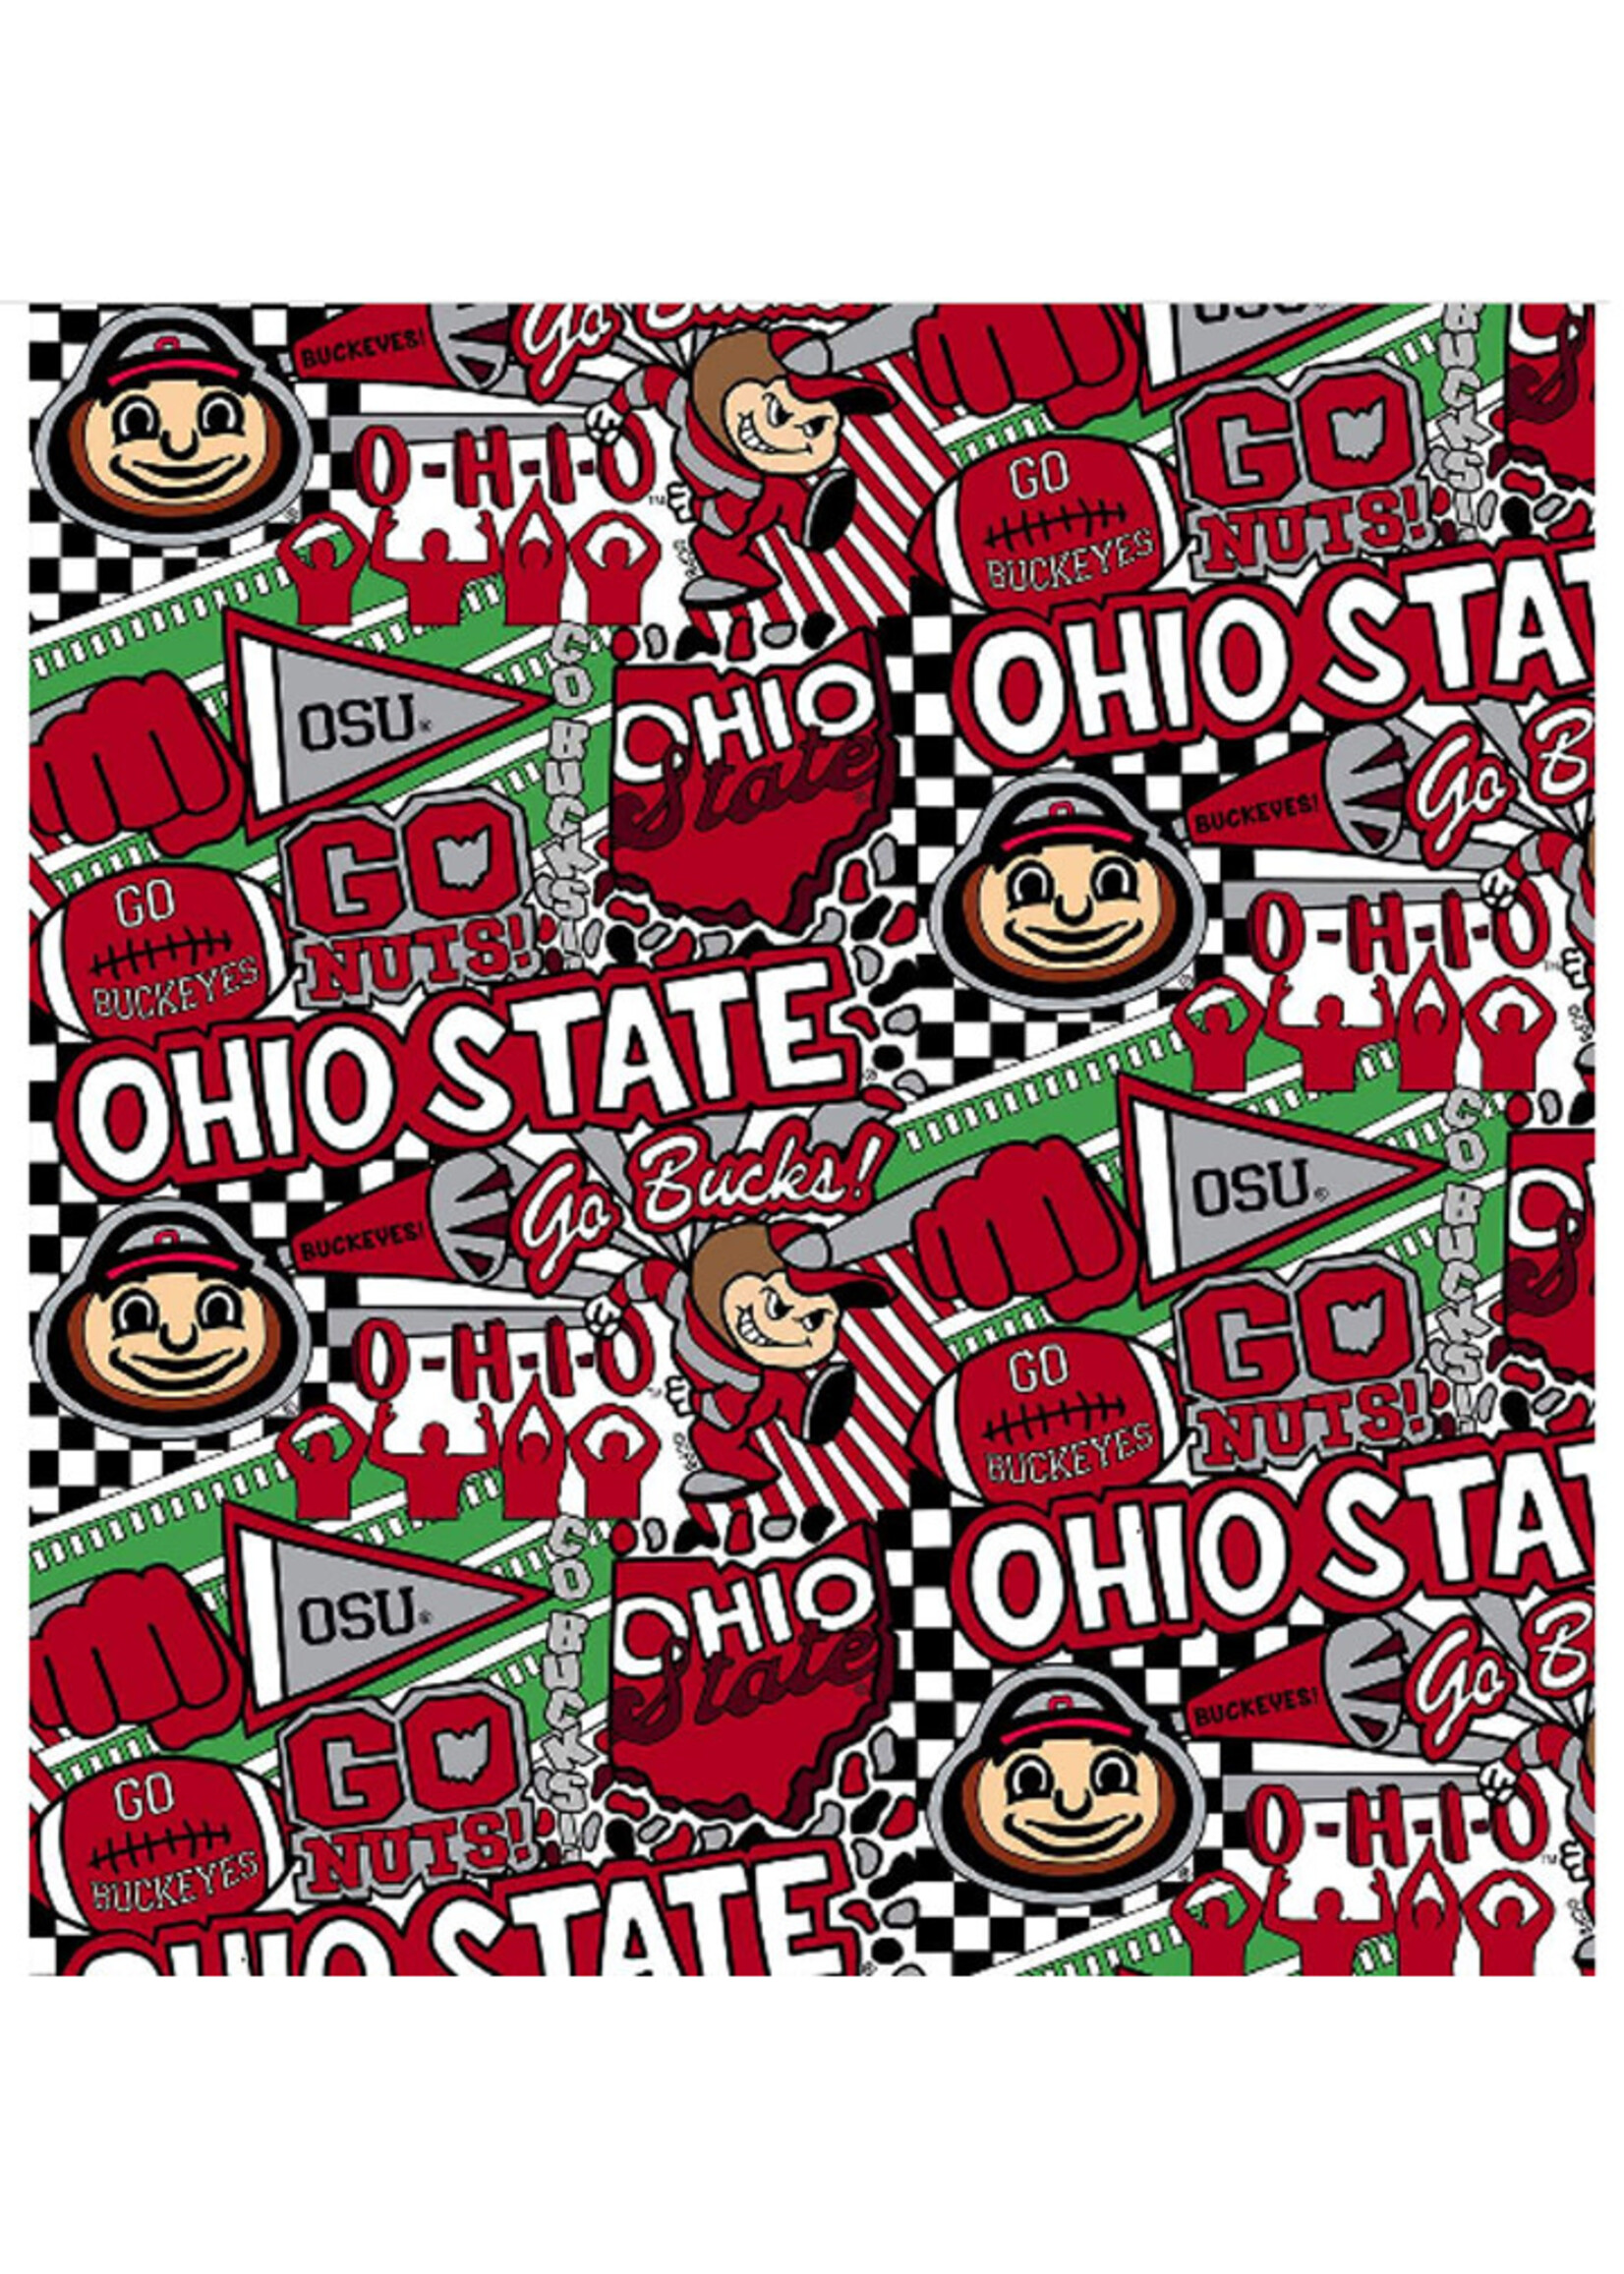 Ohio State Buckeyes Game Day Cotton Material 15ydsx42in